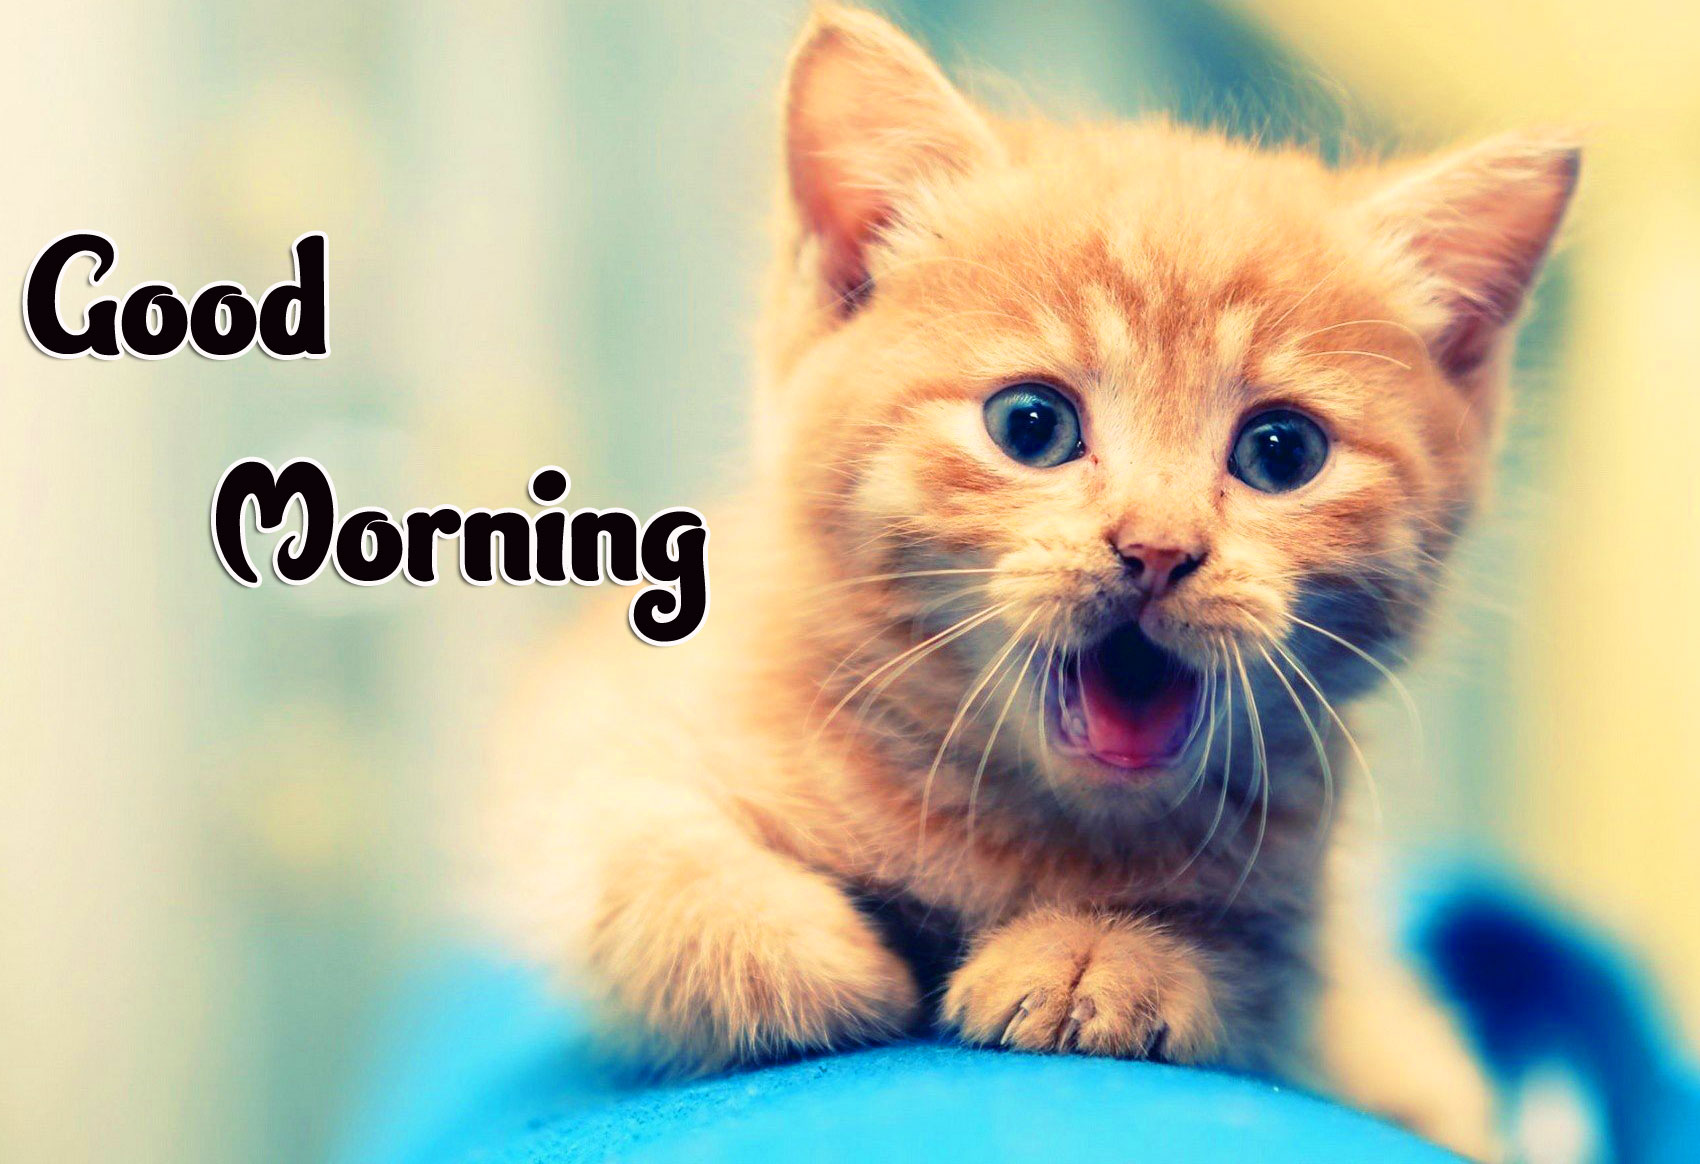 Animal Good morning Wishes Images Pics Free Download 